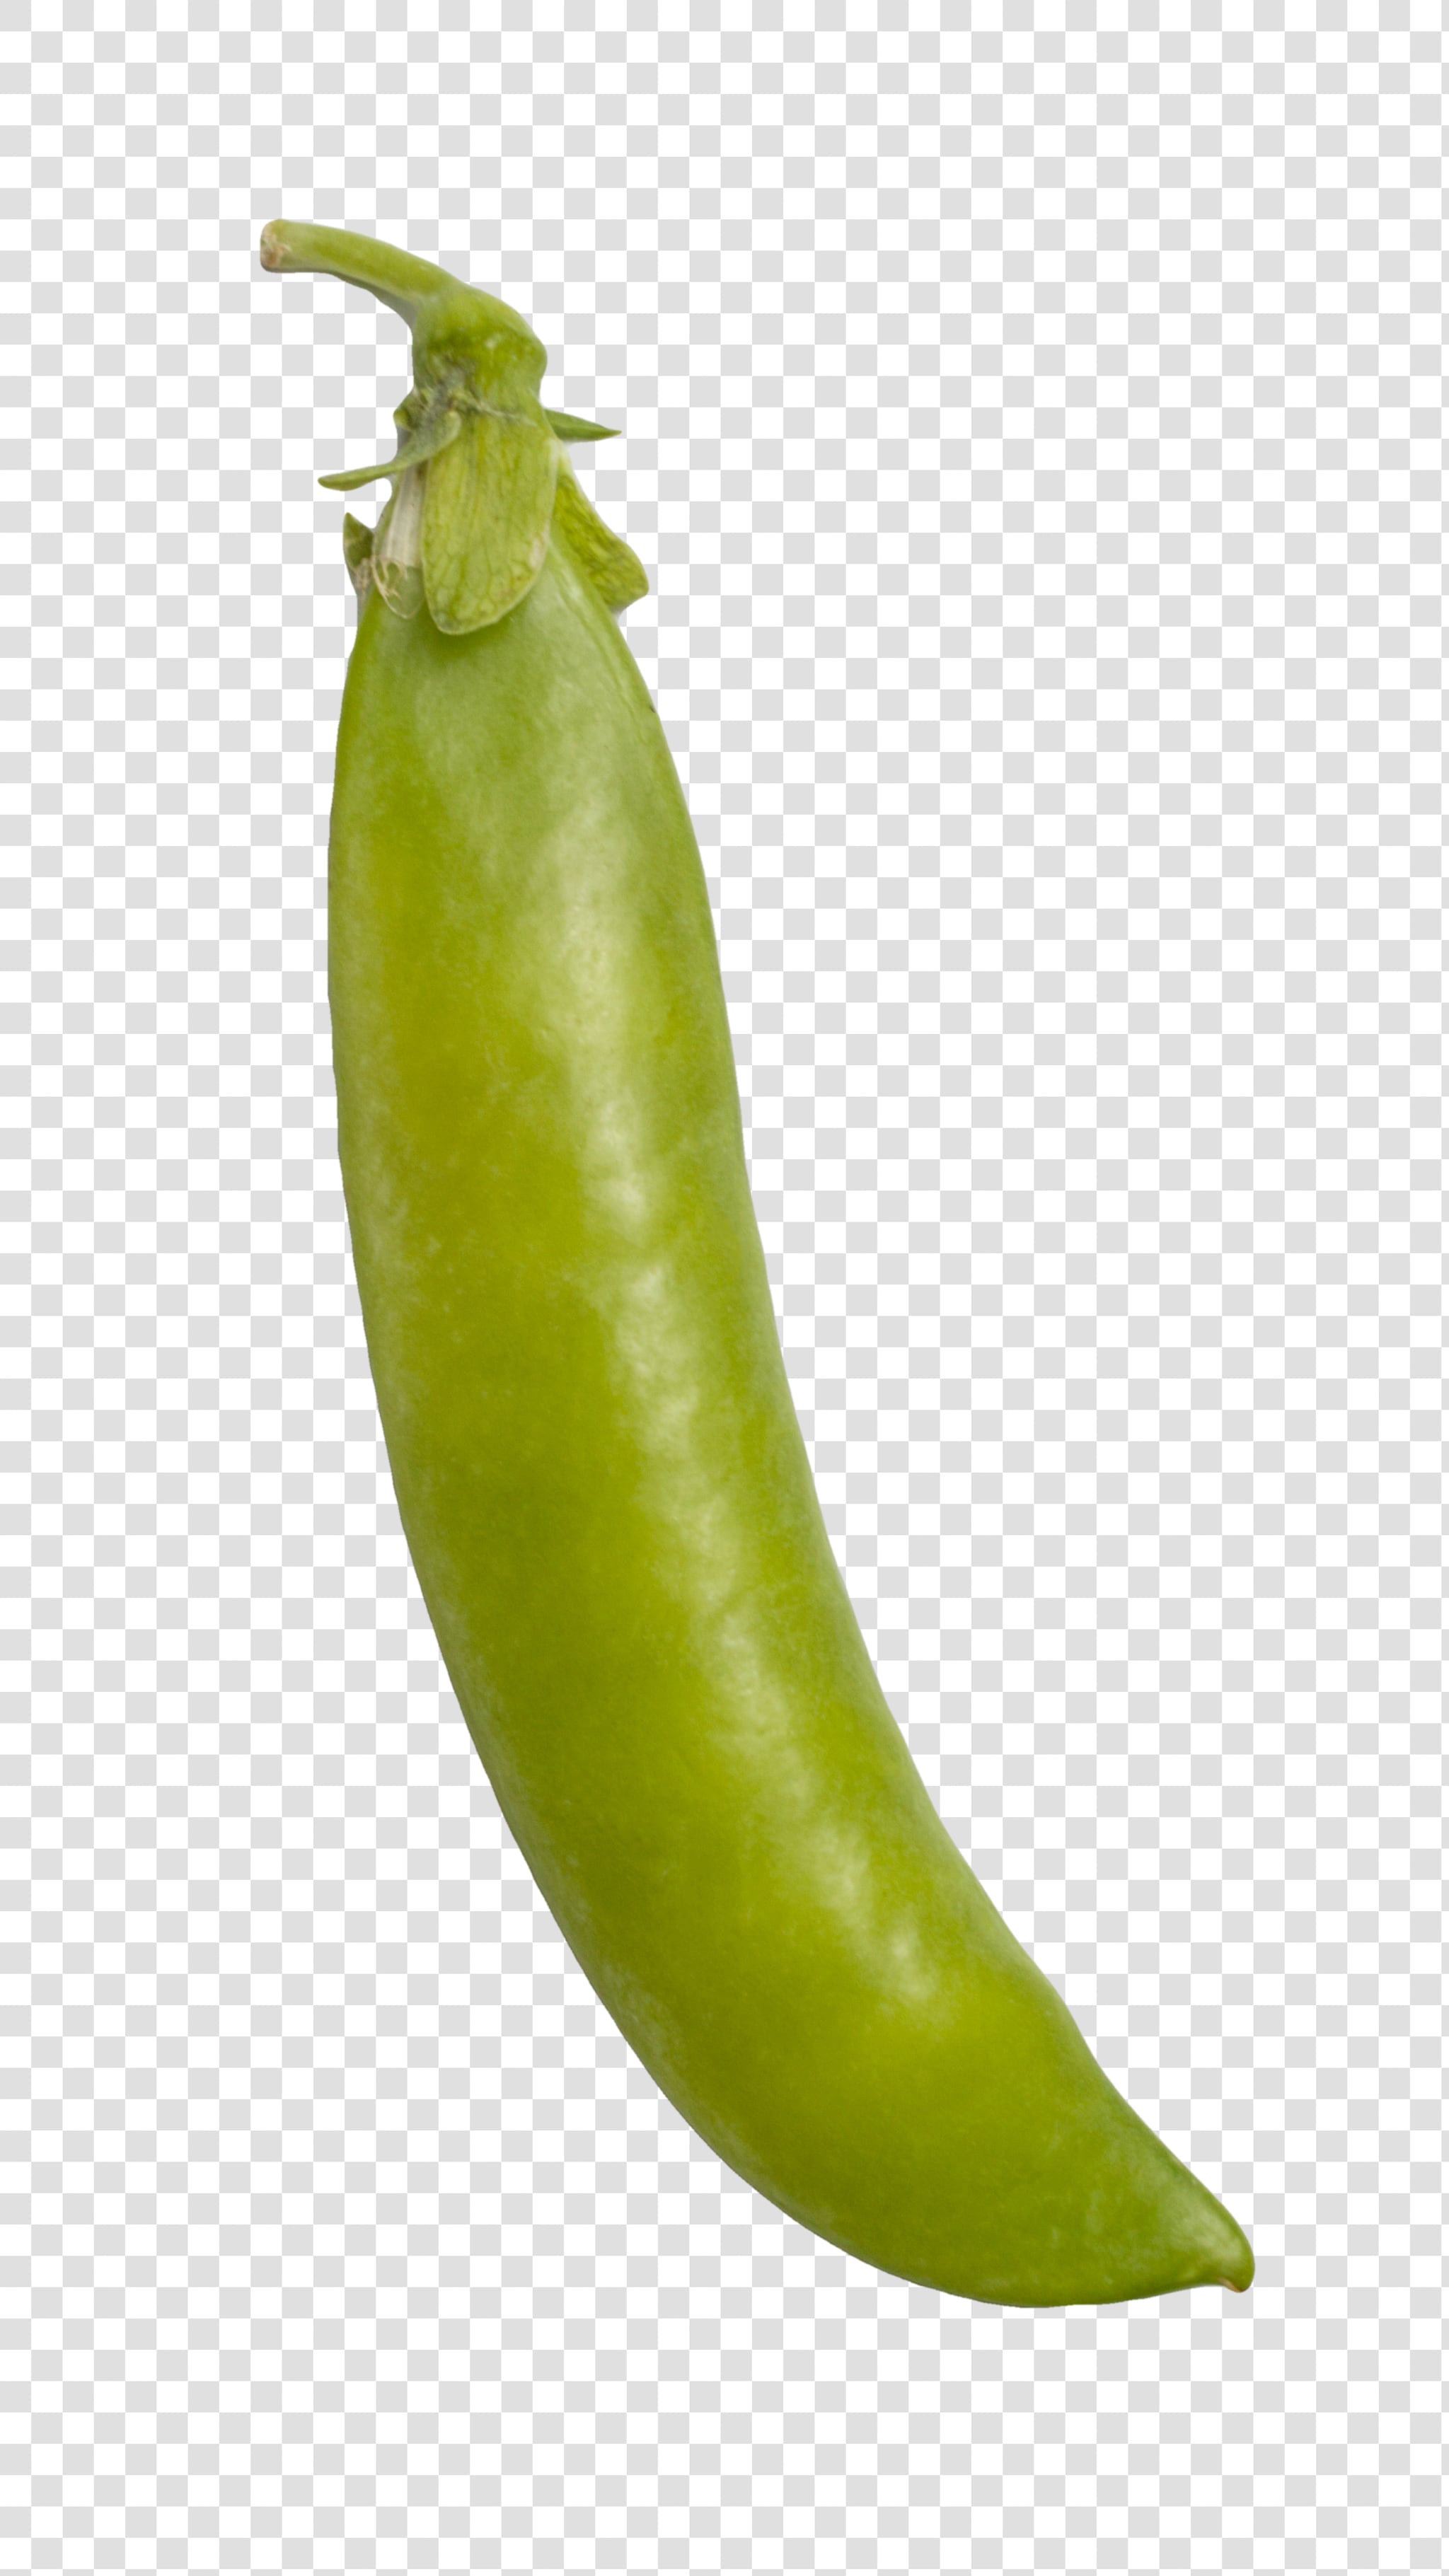 Green Pea image with transparent background